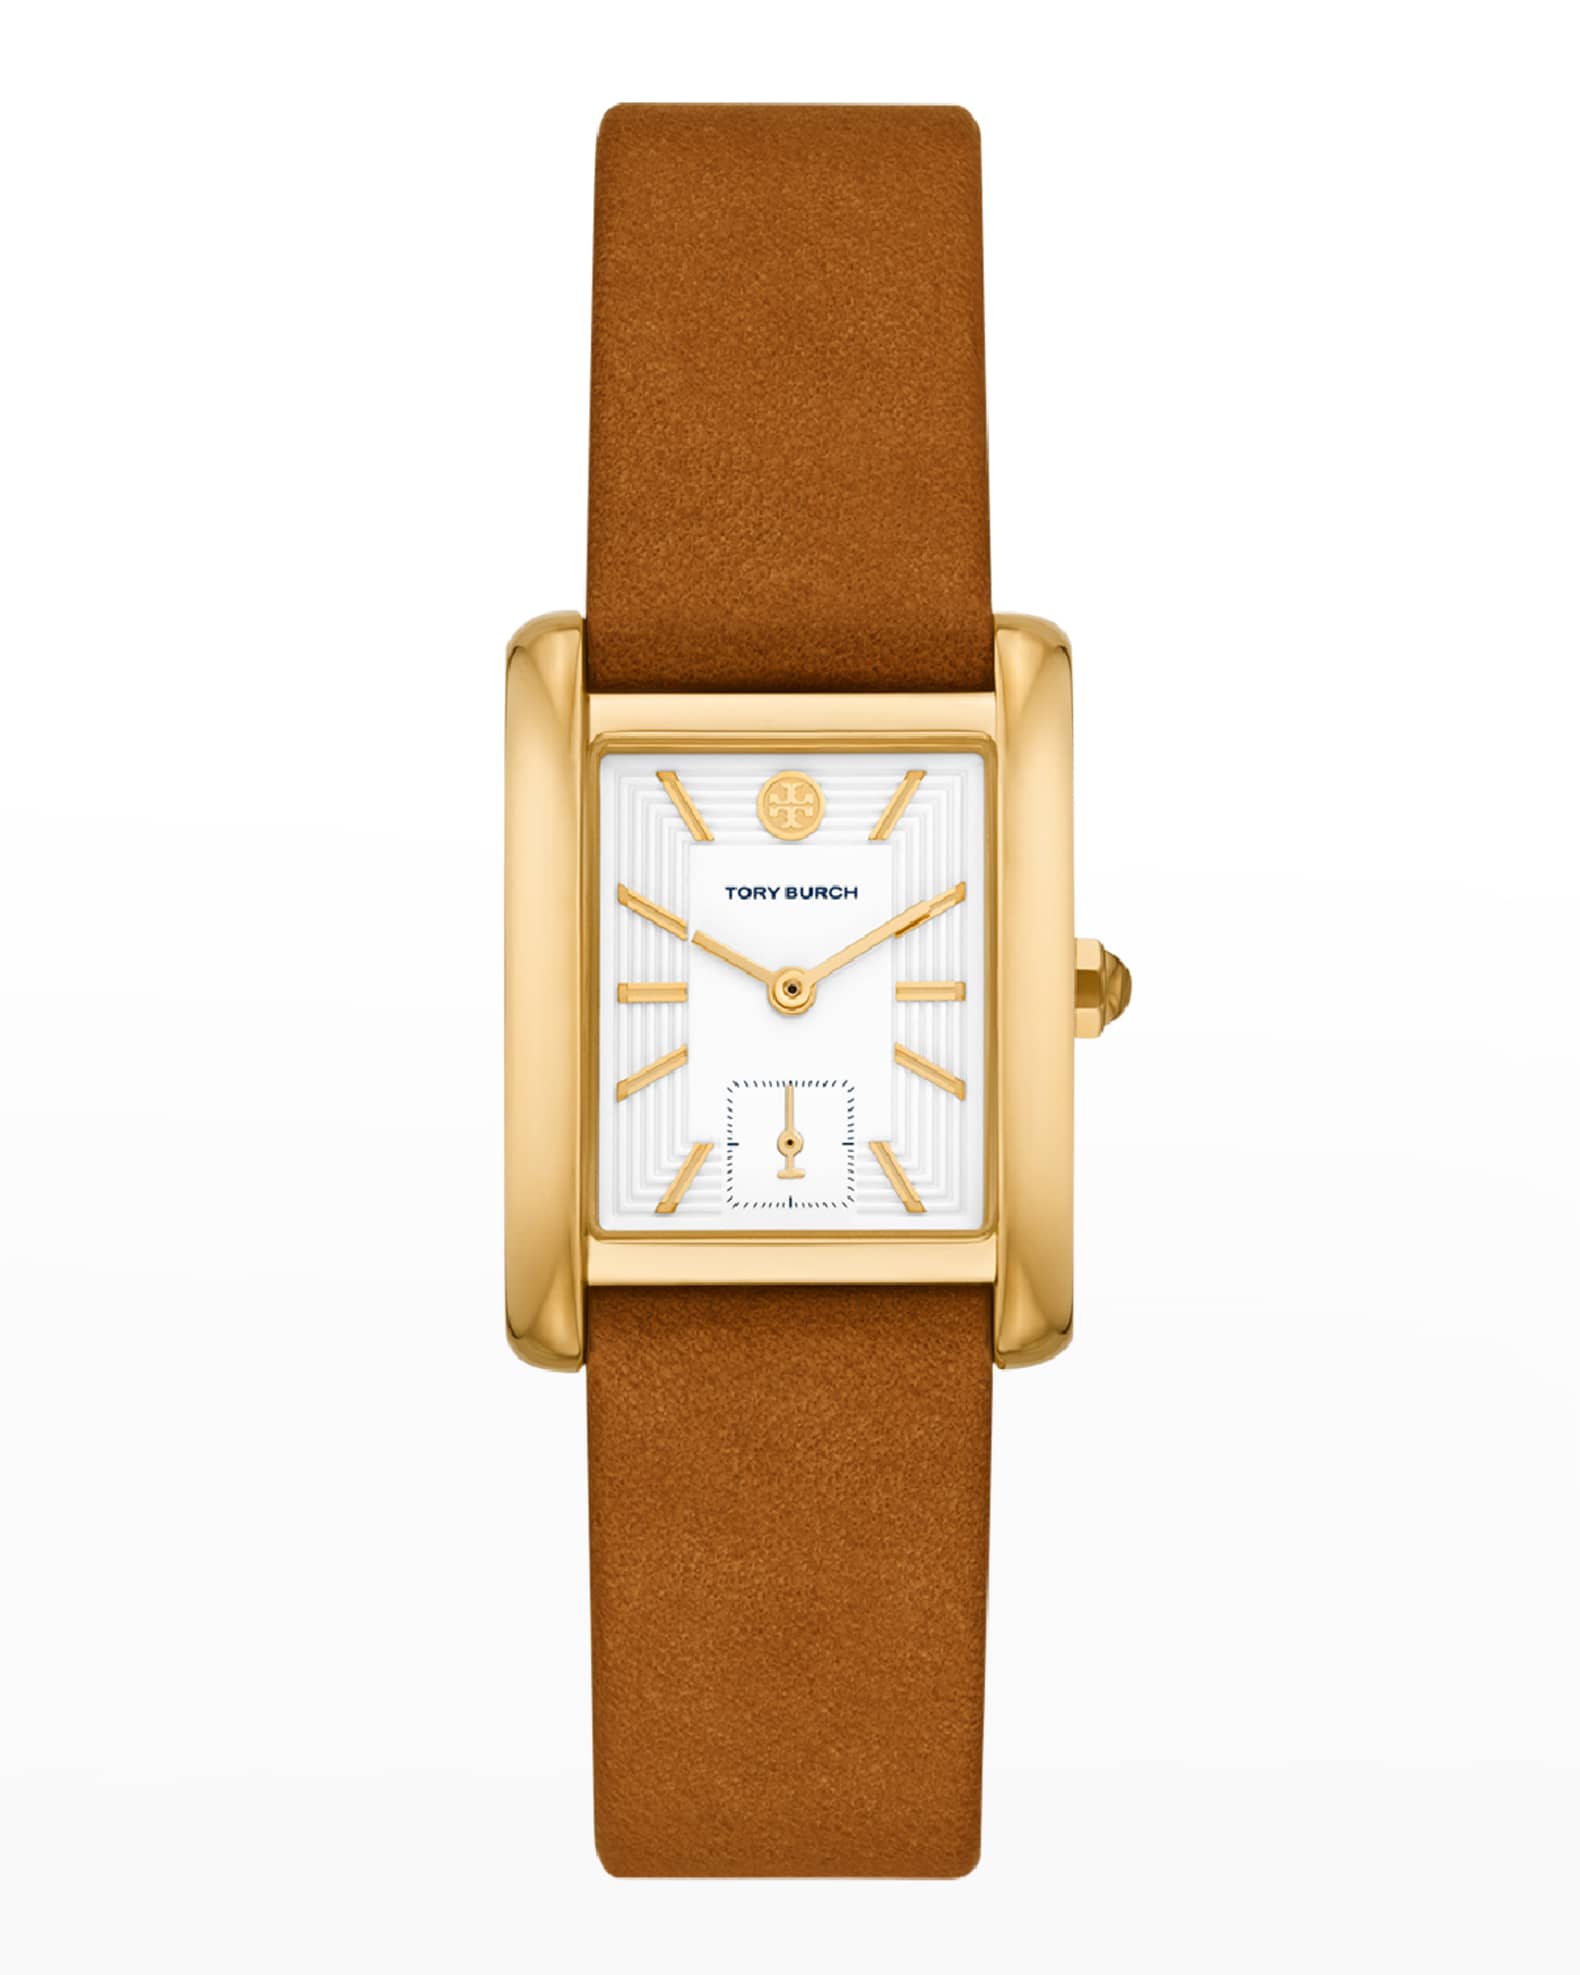 Tory Burch The Eleanor Watch with Luggage Leather Strap | Neiman Marcus